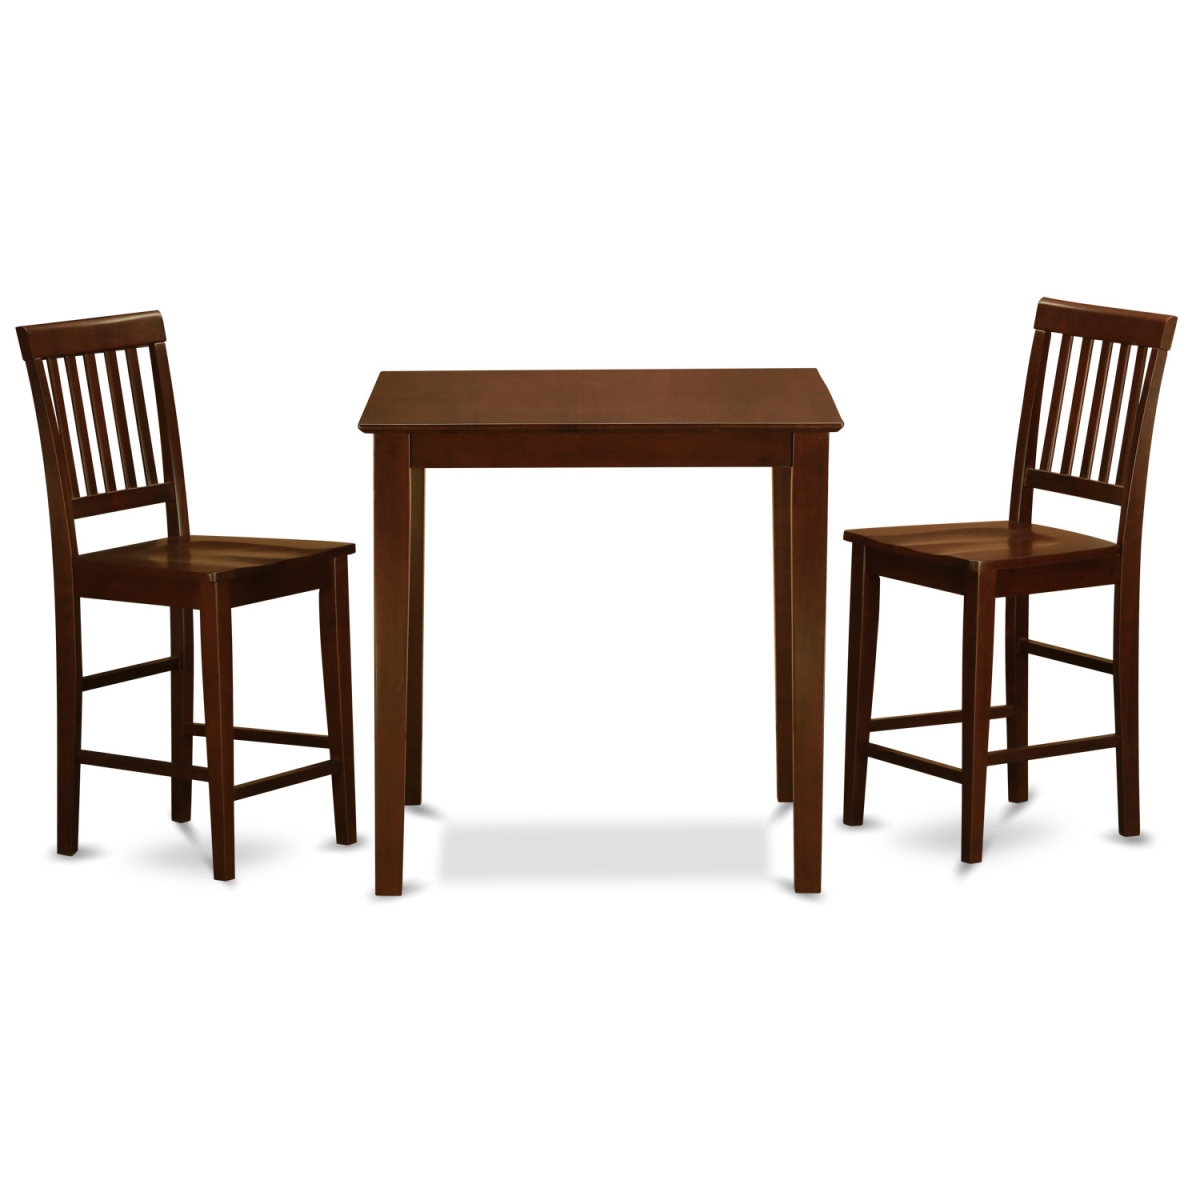 East West Furniture VERN3-MAH-W Counter Height Pub Table & 2 Kitchen Chairs, Mahogany